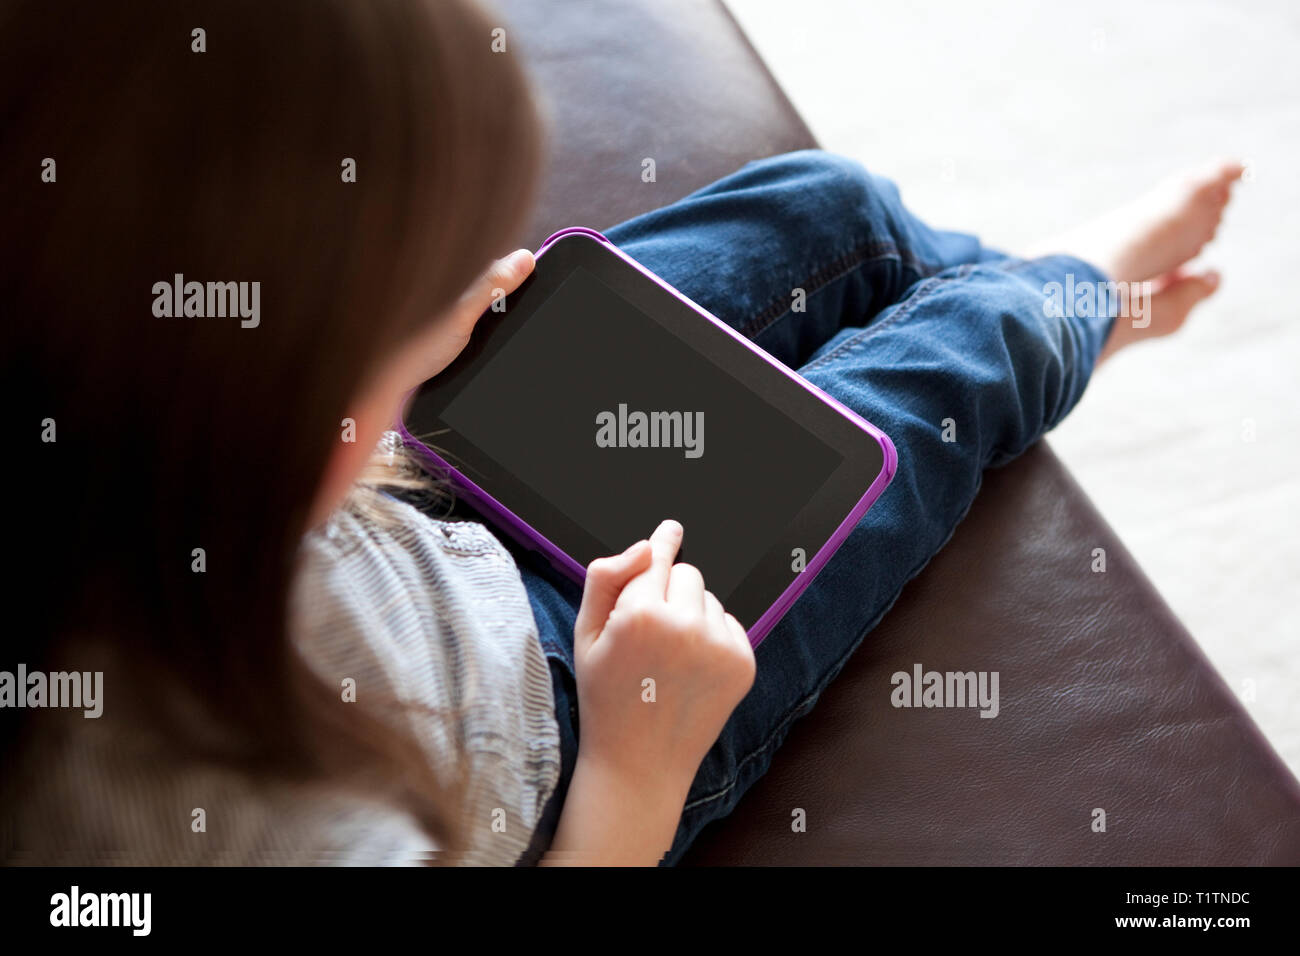 Over the shoulder view of girl using tablet device Stock Photo